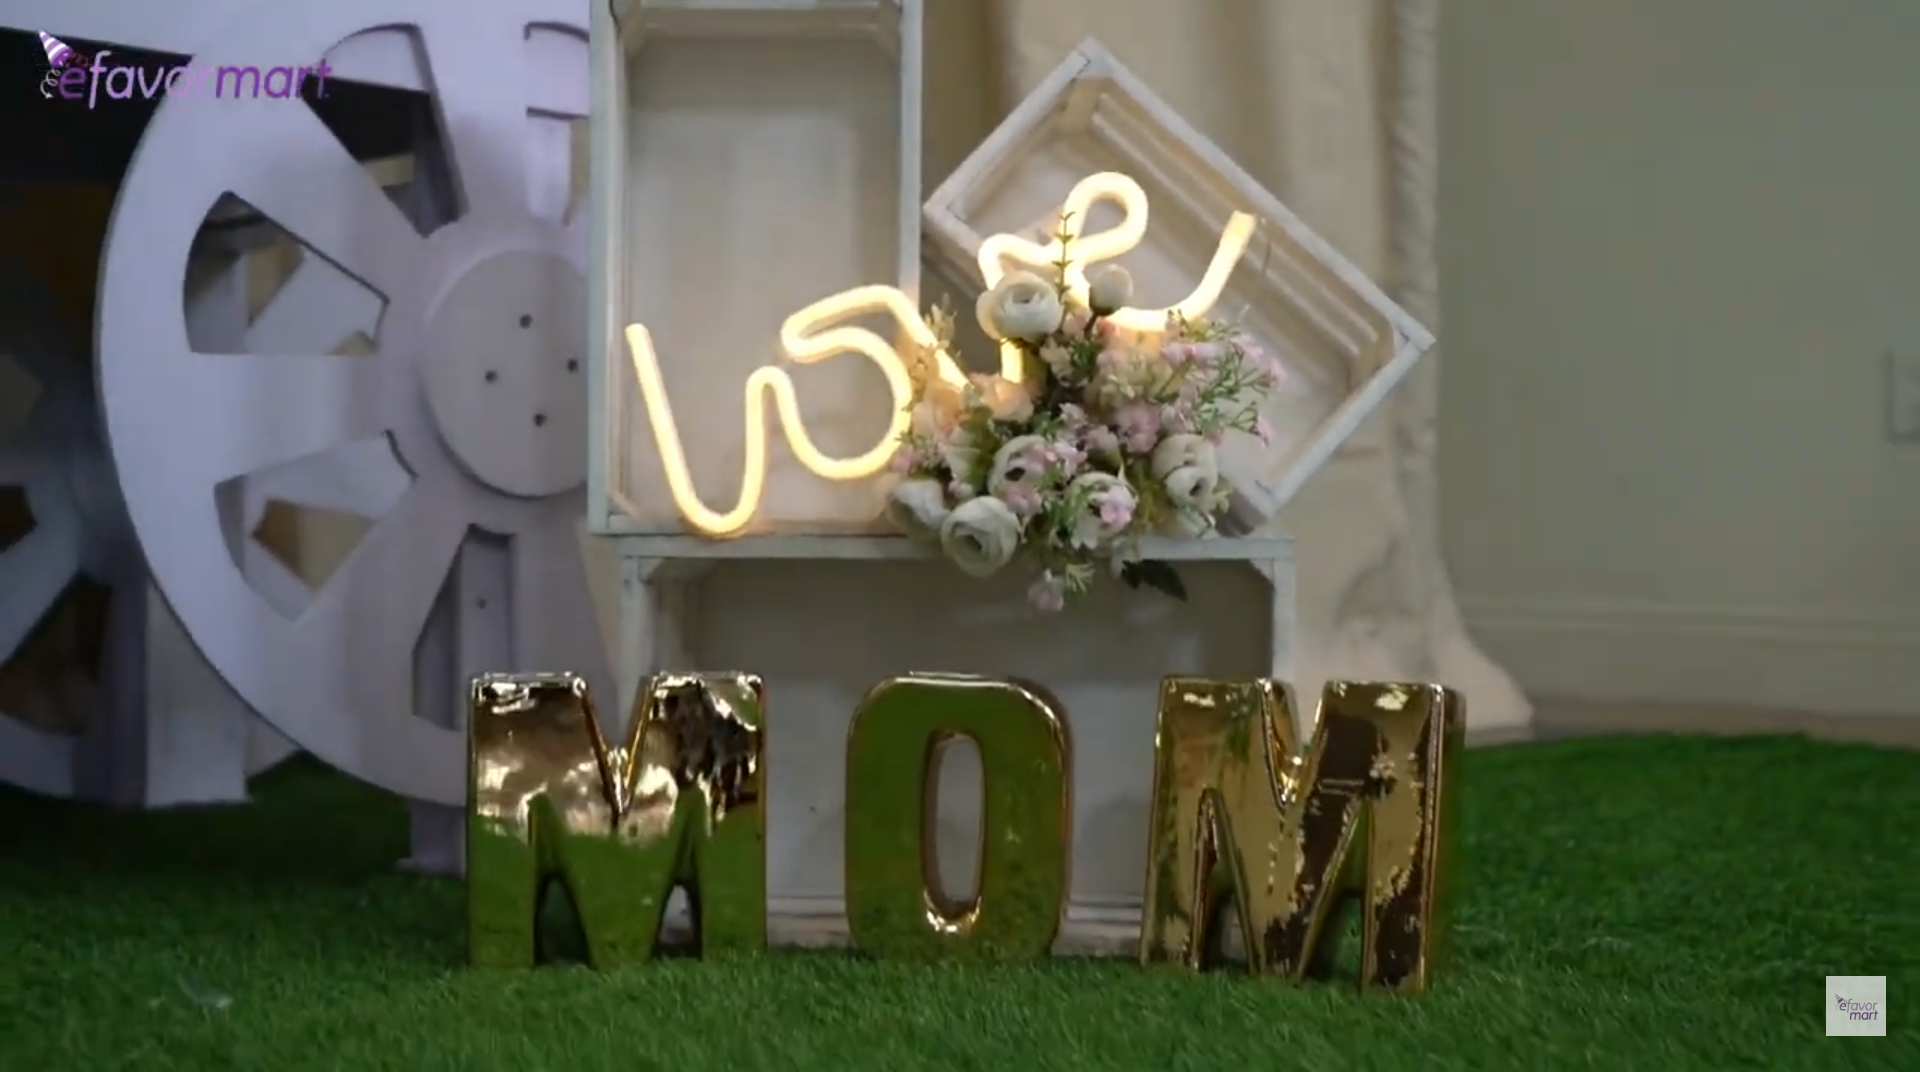 Close-up of a Mother's Day decor setup with glowing 'love' neon sign and floral decorations.